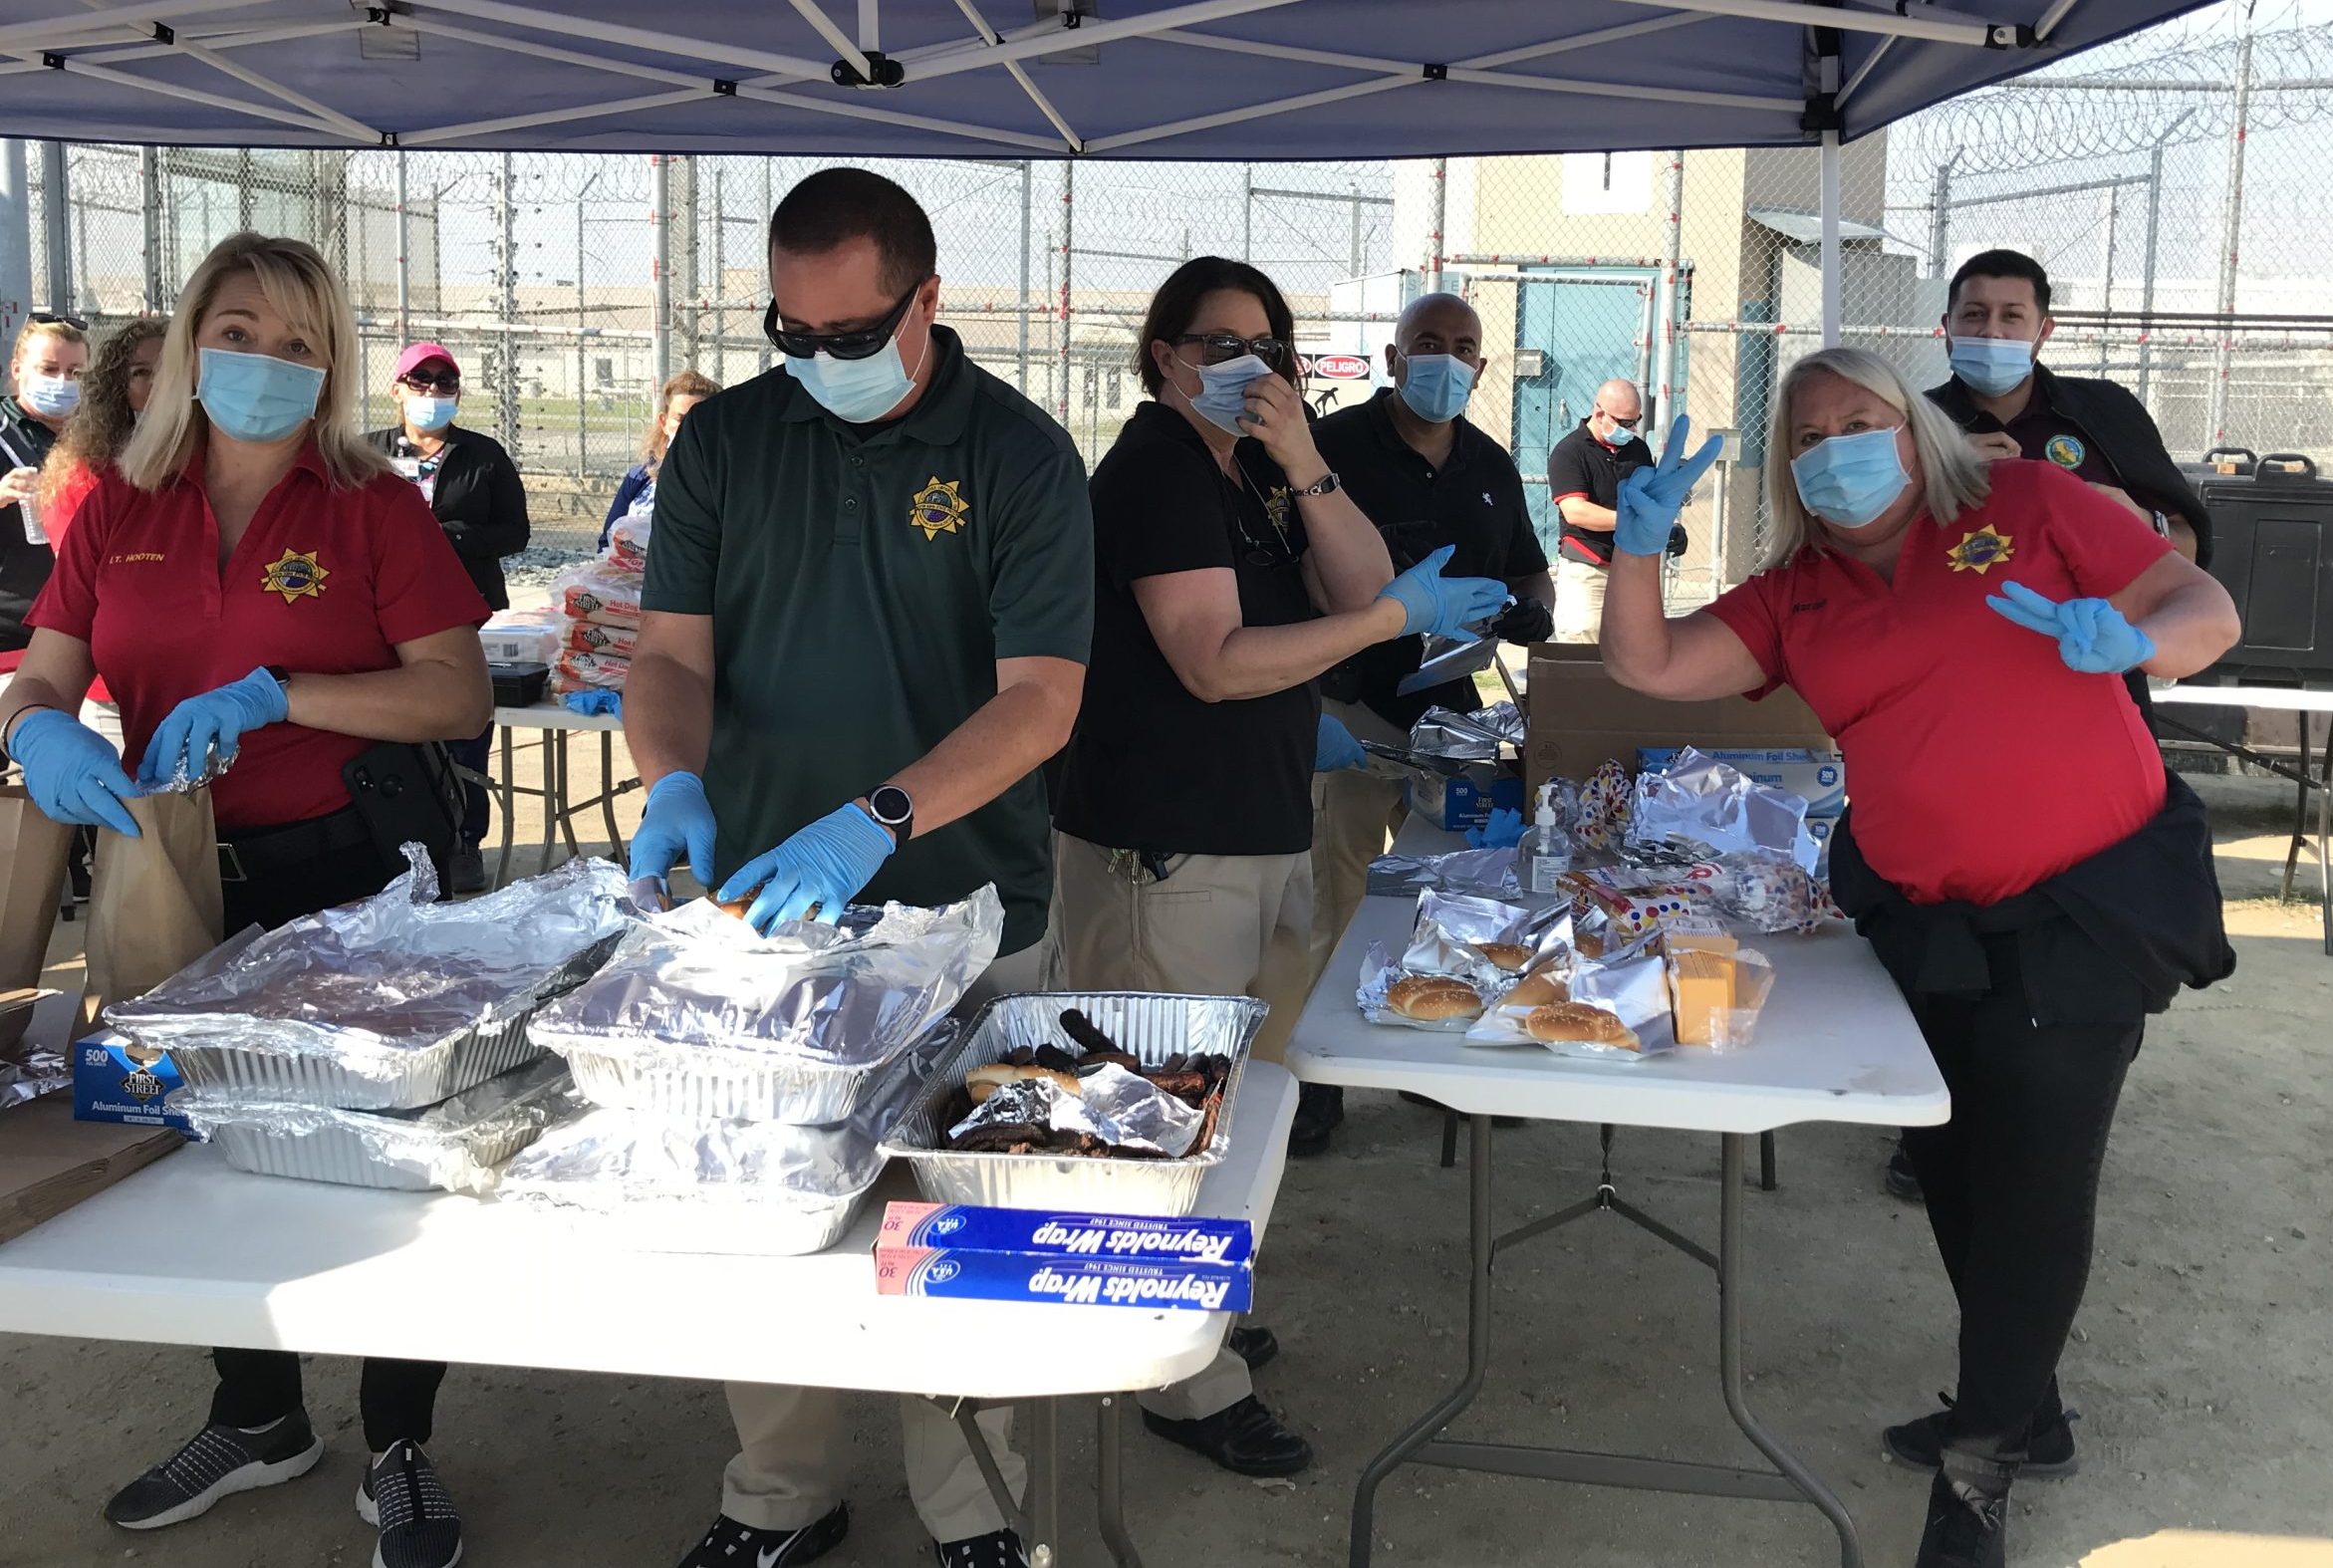 North Kern prison staff around a table with barbecue food.